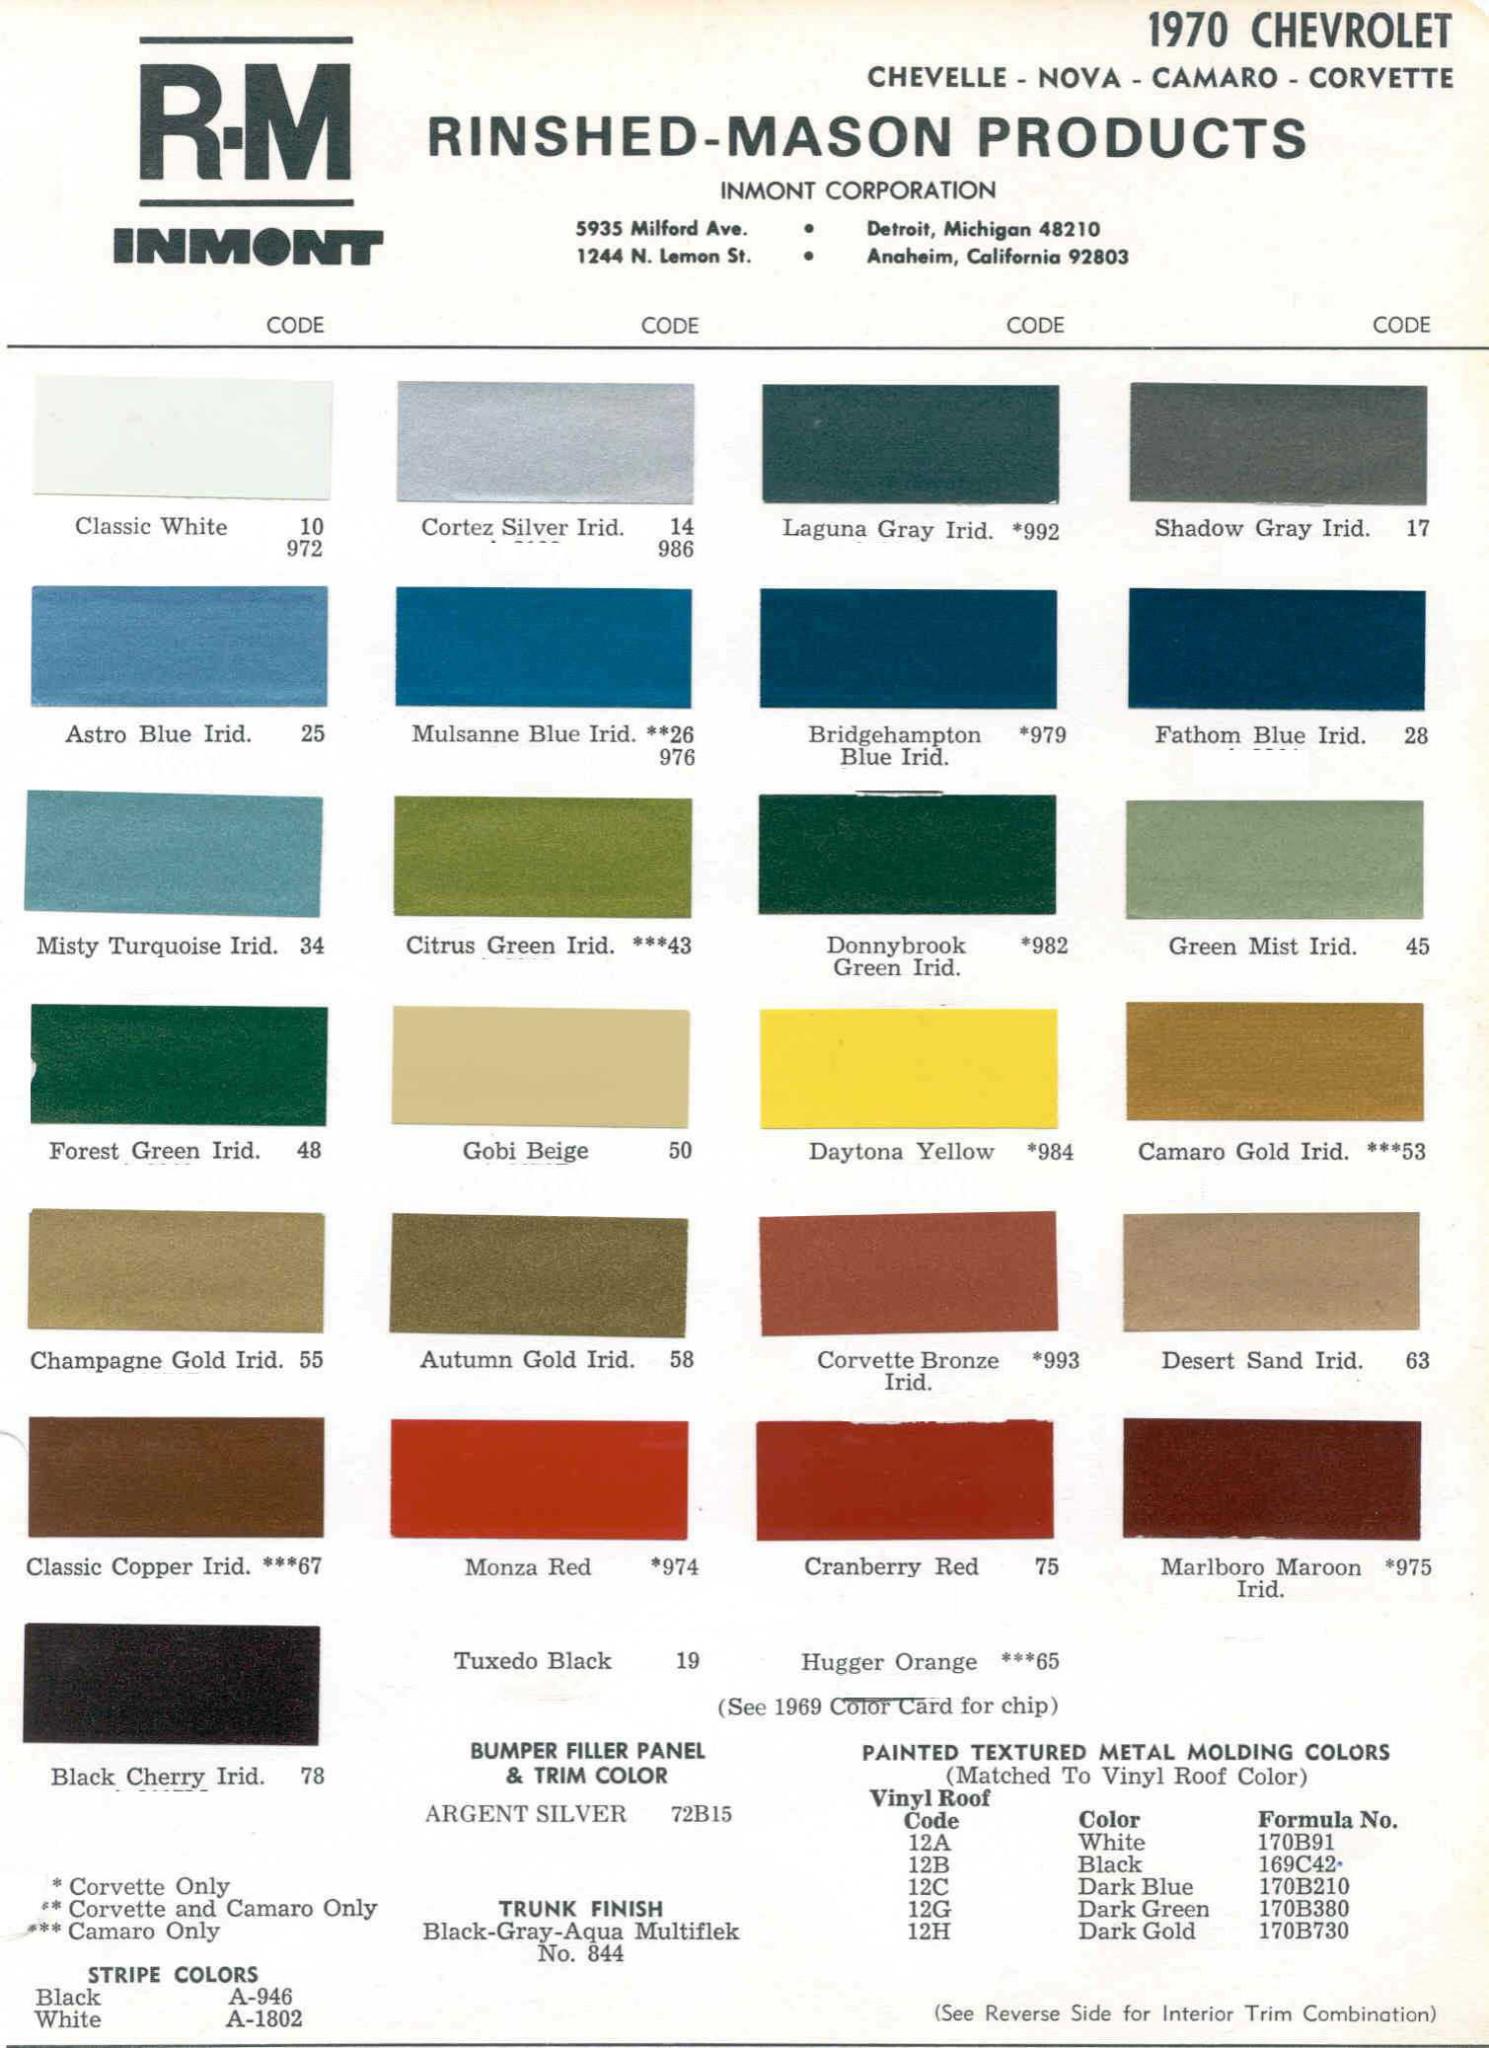 Paint Codes and Color Swatches used by Chevrolet on Vehicles